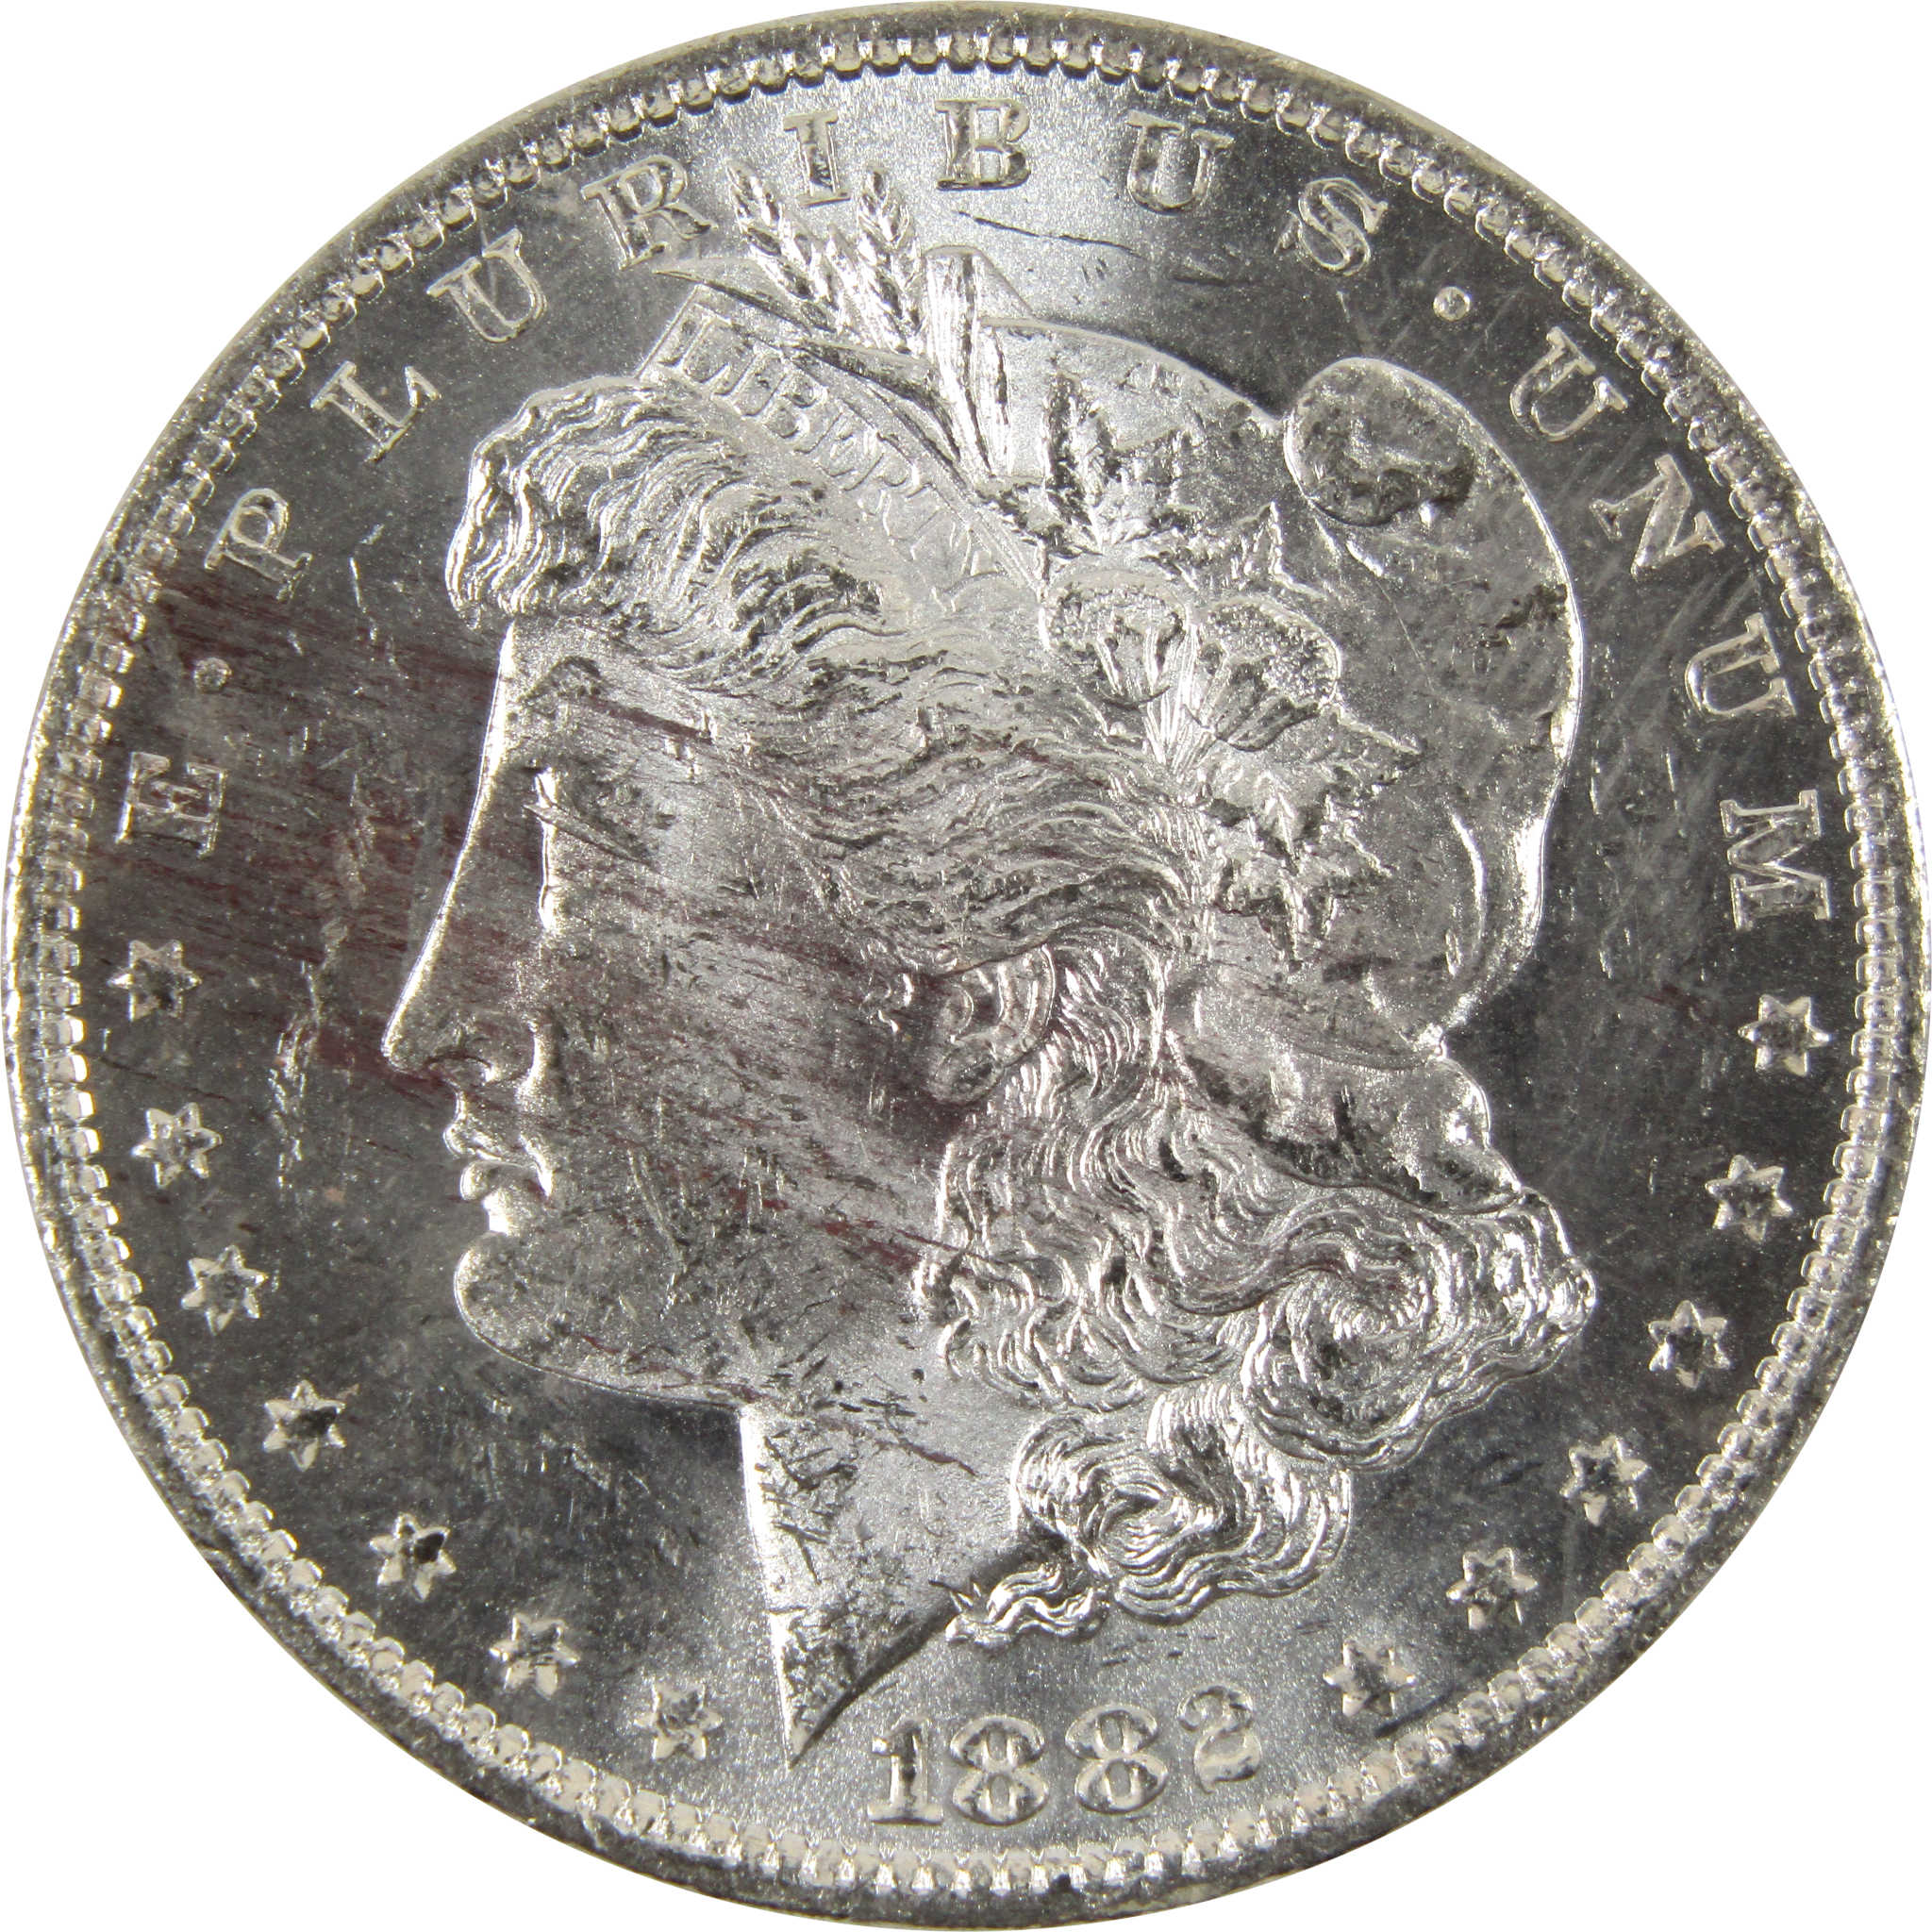 1882 O Morgan Dollar Unc Details 90% Silver $1 Bag Marks SKU:I8792 - Morgan coin - Morgan silver dollar - Morgan silver dollar for sale - Profile Coins &amp; Collectibles